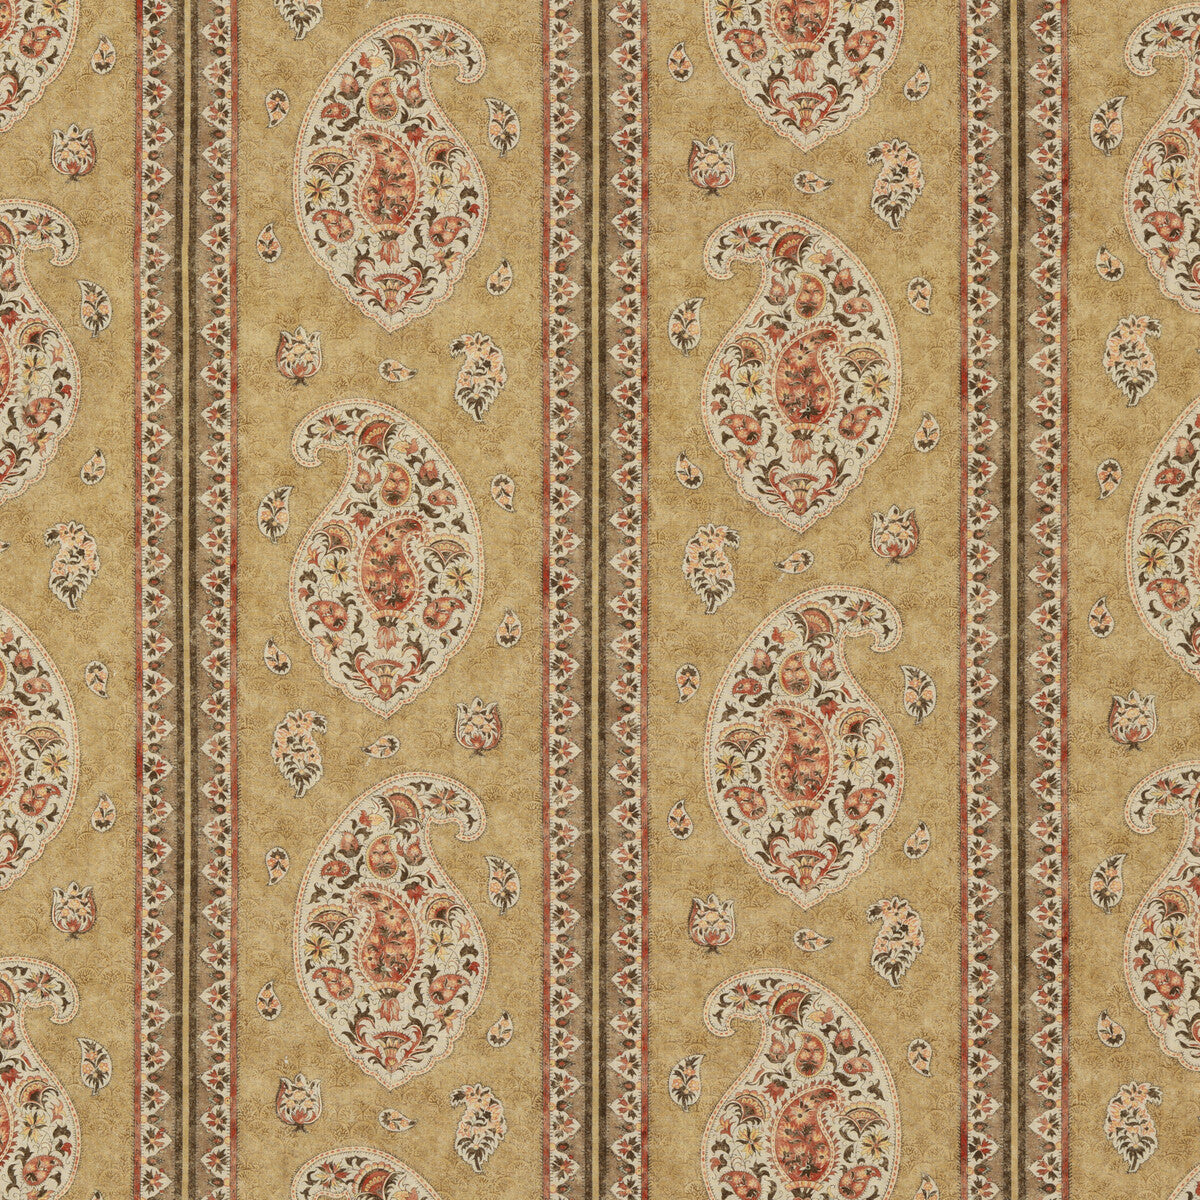 Coromandel fabric in tobacco color - pattern BP10831.2.0 - by G P &amp; J Baker in the Coromandel collection